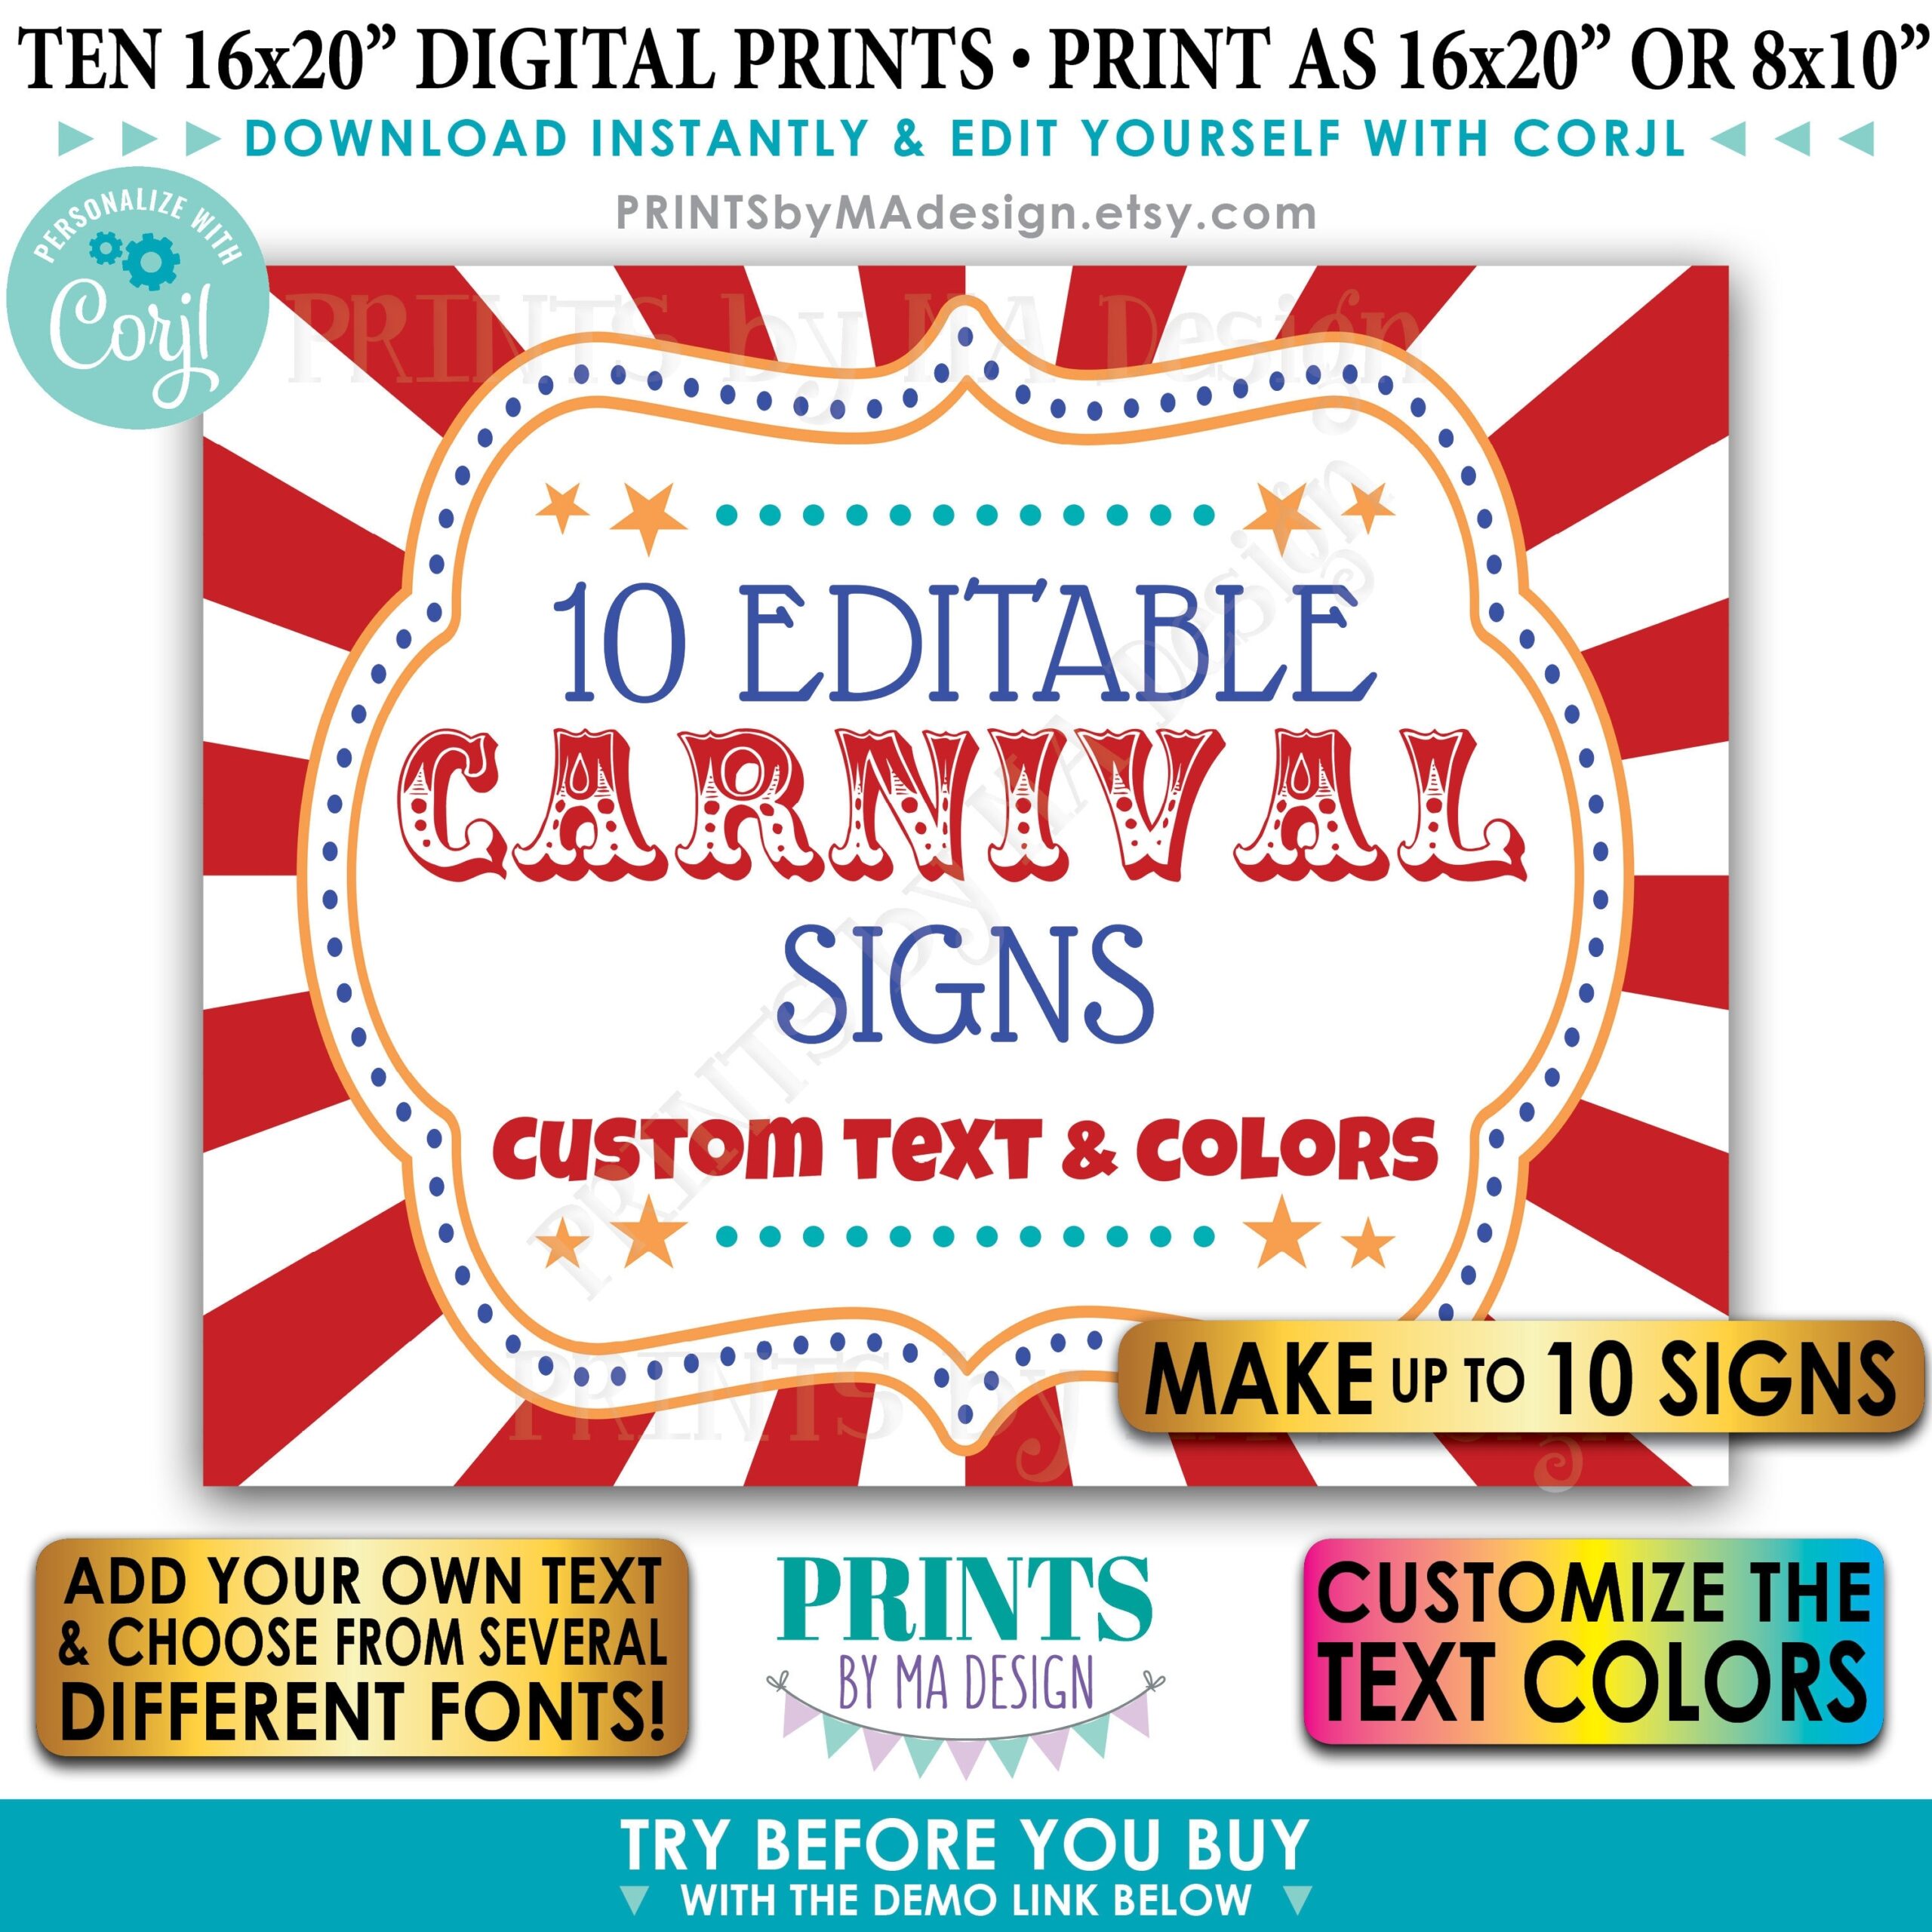 Editable Carnival Signs Circus Theme Party Birthday Make Up To 10 Custom PRINTABLE 8x10 16x20 Carnival Signs Edit Yourself W corjl Etsy - Free Printable Carnival Signs